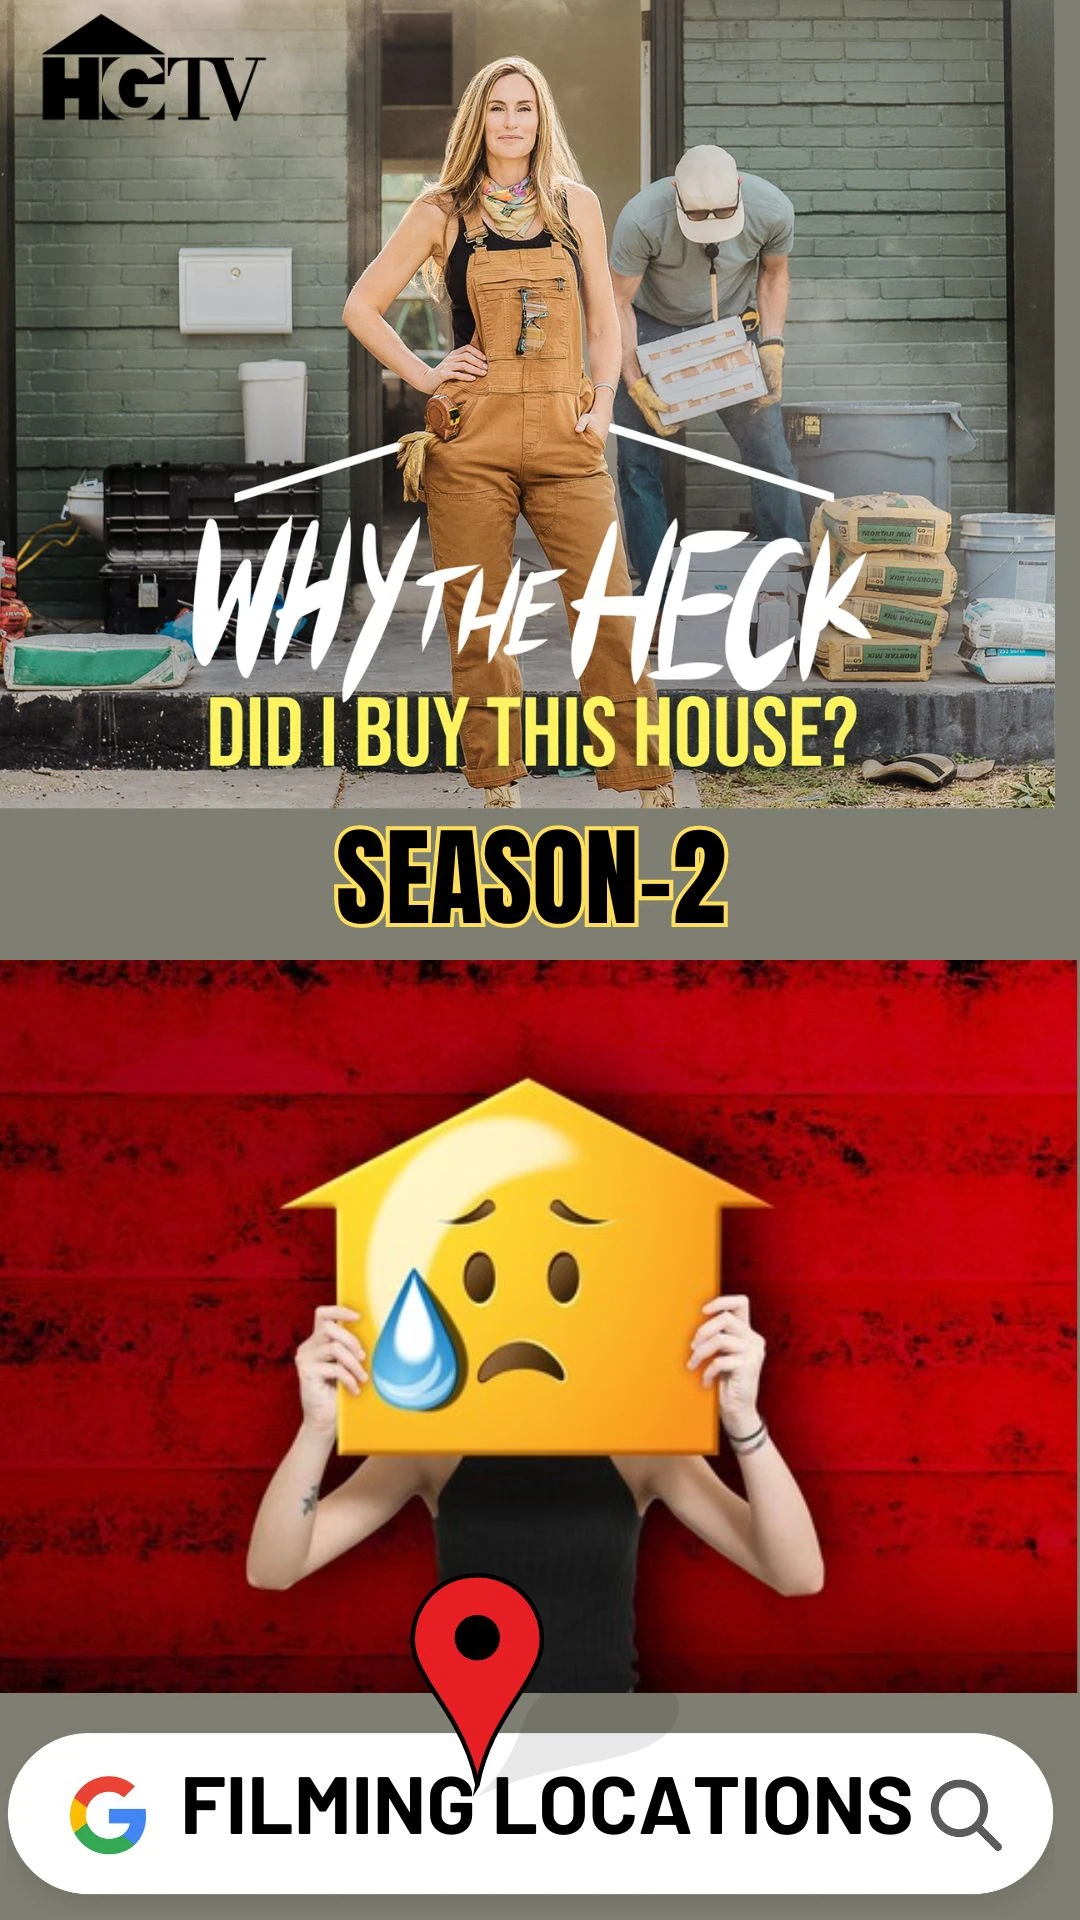 Why The Heck Did I Buy This House Season 2 Filming Locations (1)